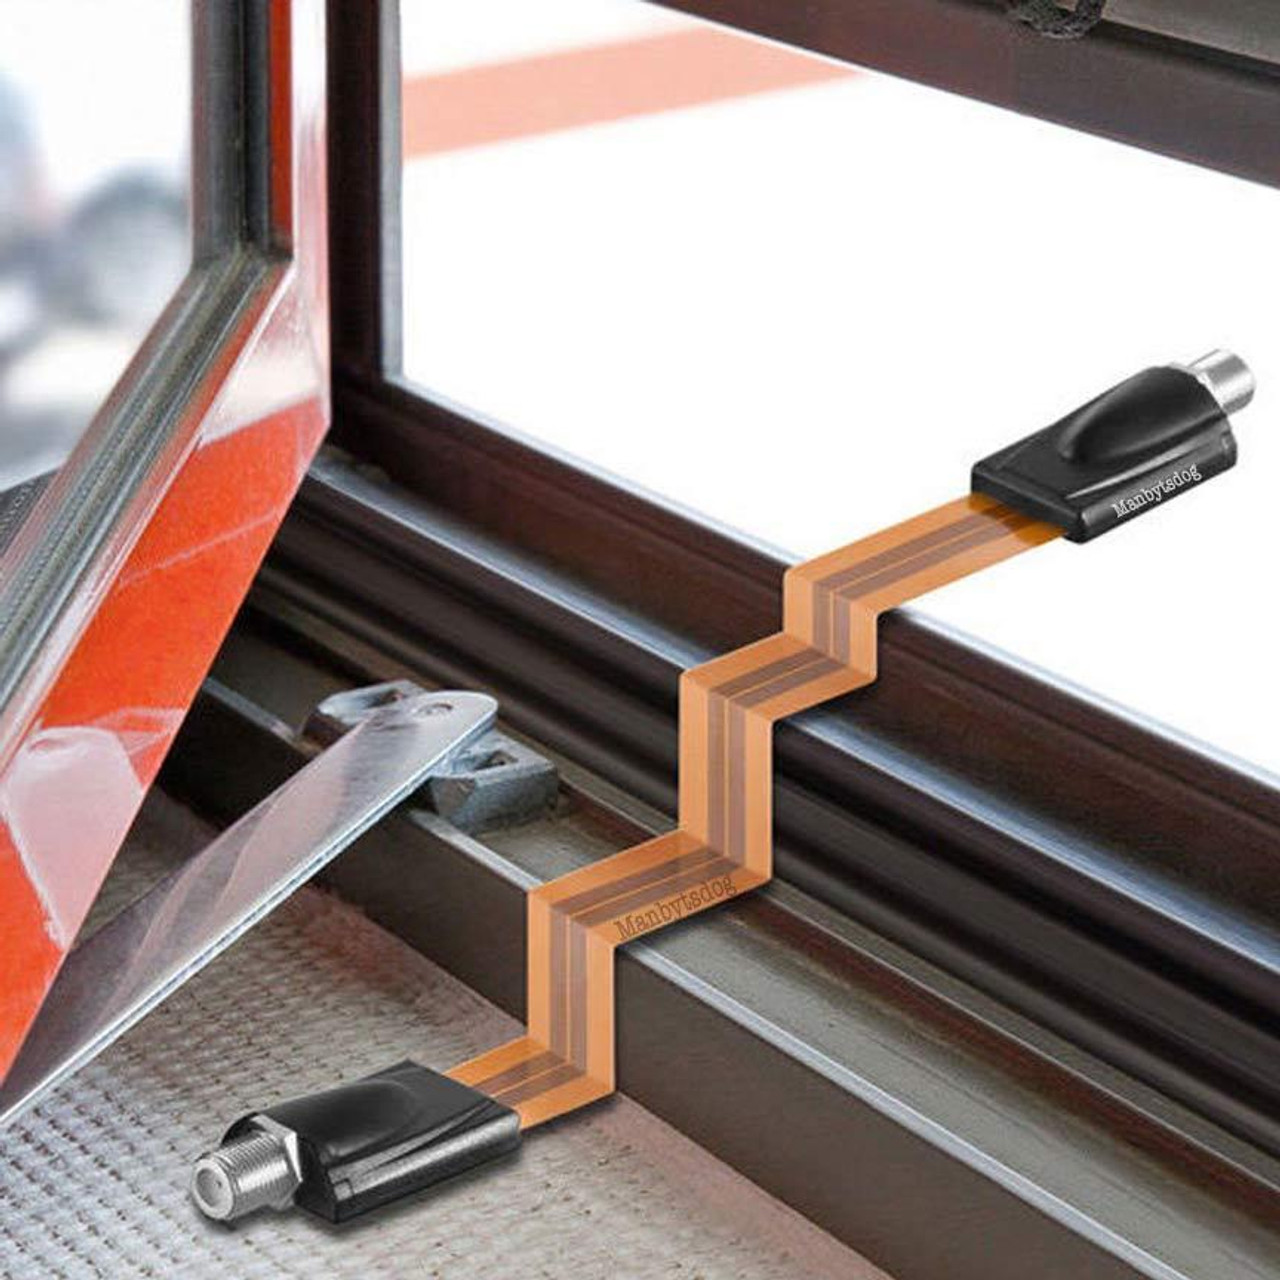 Flat Window Feed-Through Flexible RG-6 Coaxial Cable